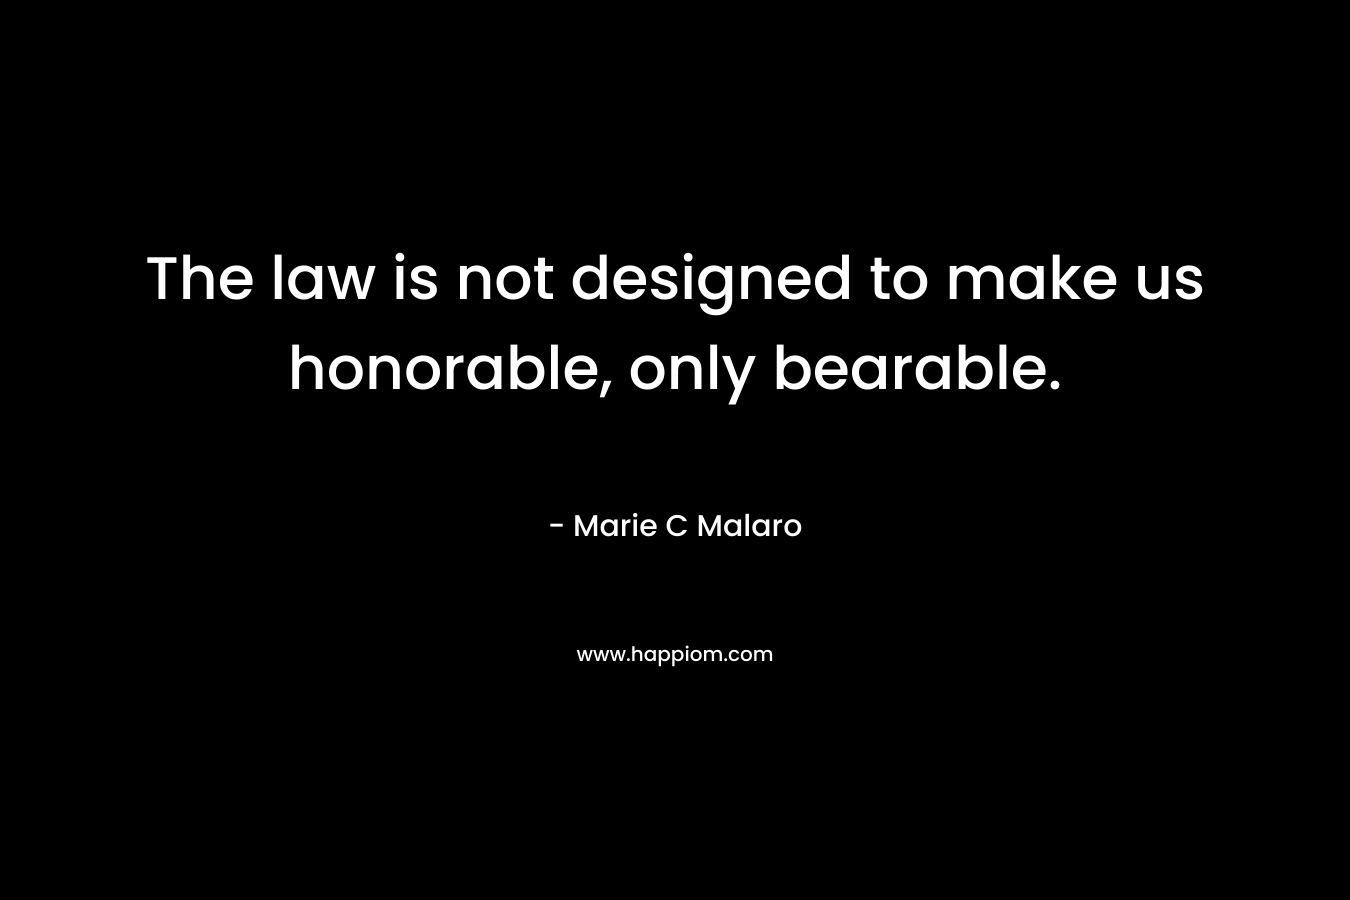 The law is not designed to make us honorable, only bearable. – Marie C Malaro